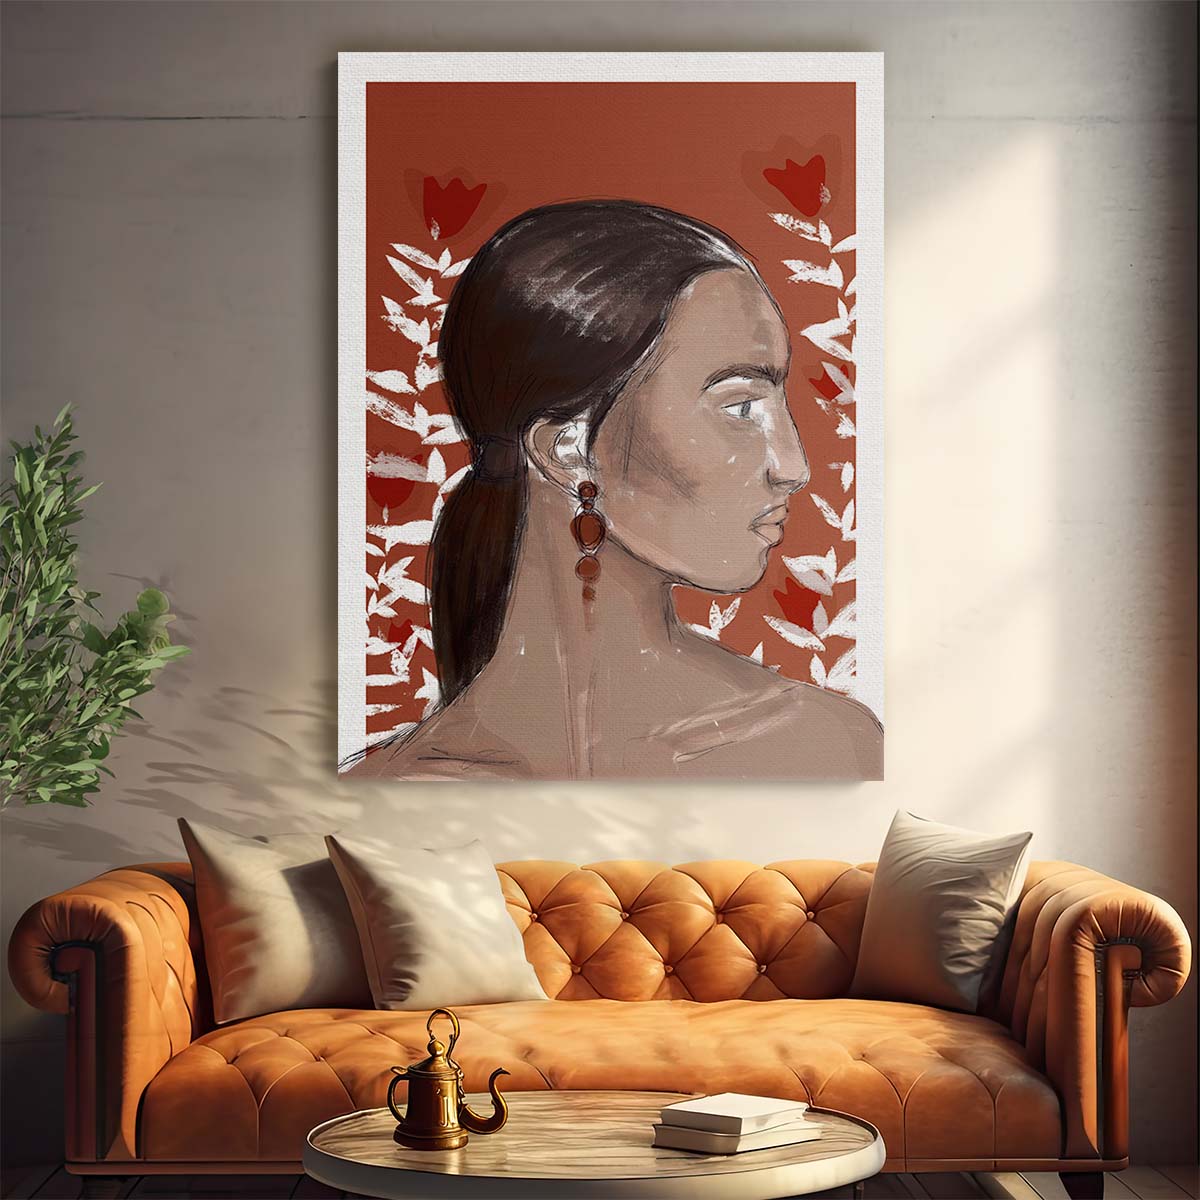 Treechild's Brown Sienna Woman Profile Illustration with Painted Earrings by Luxuriance Designs, made in USA